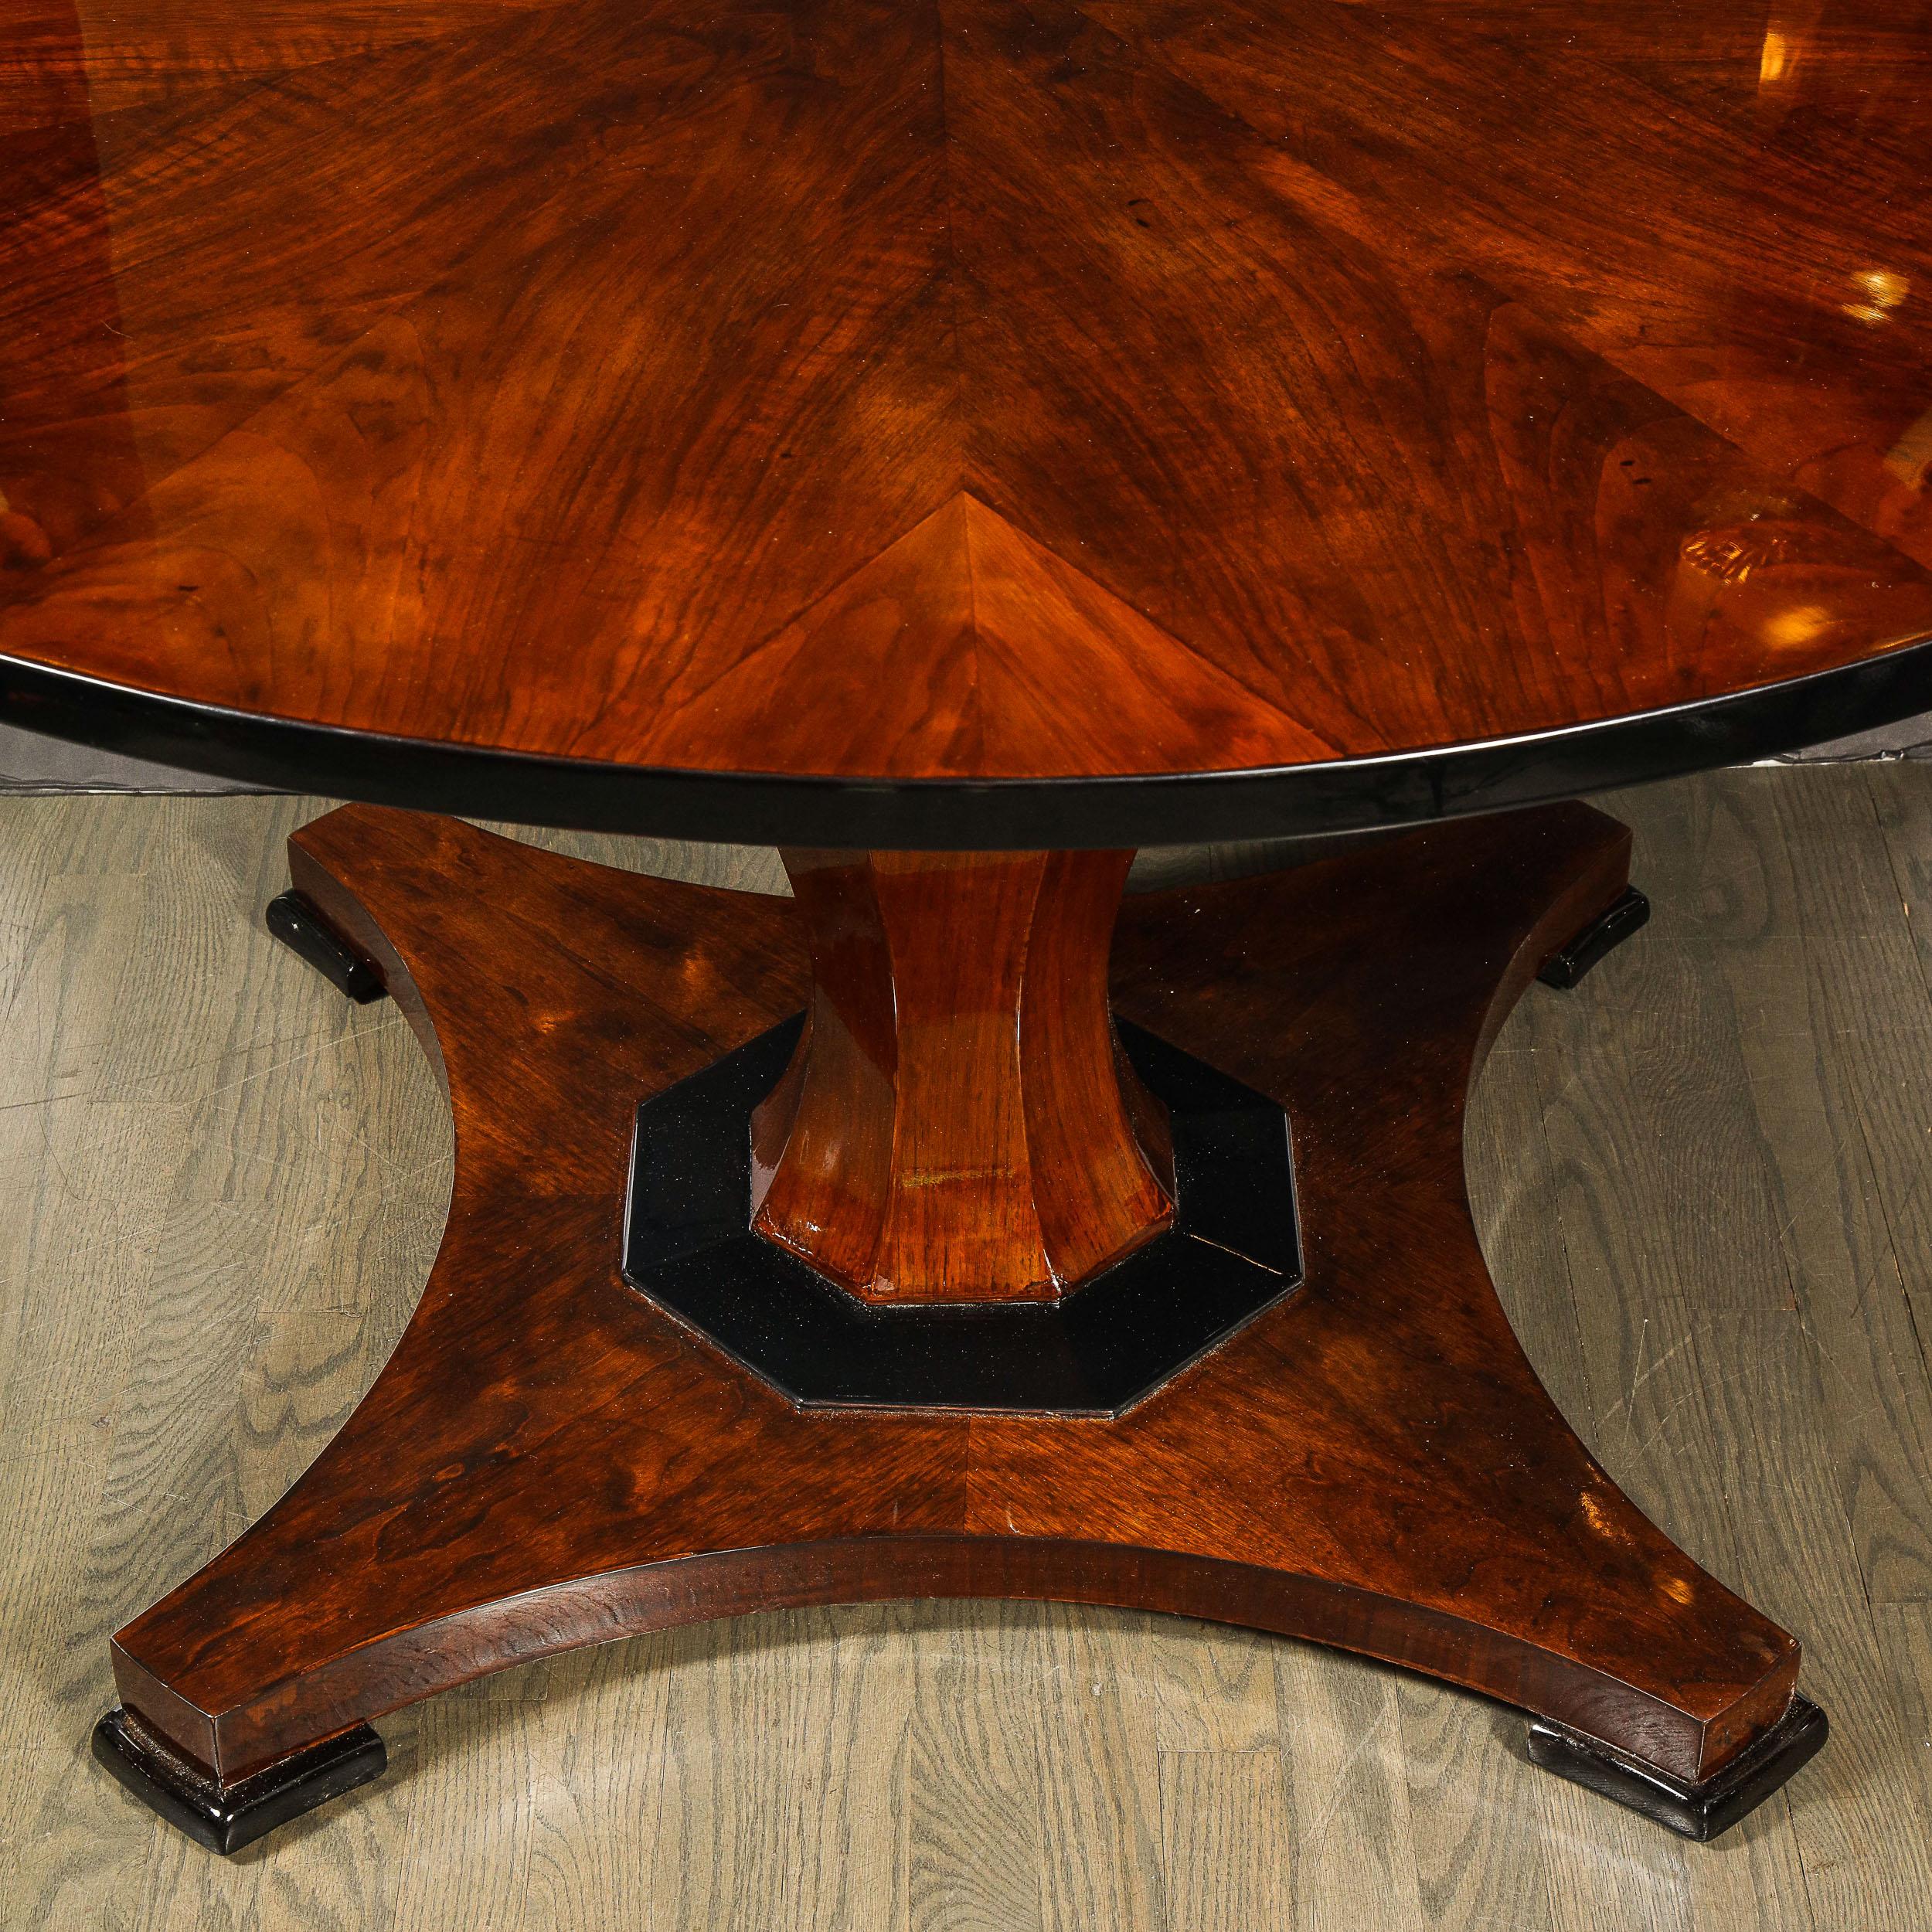 This elegant Art Deco dining/ center table was realized in France, circa 1930. It features a circular top in bookmatched walnut top an undulating faced body also in bookmatched walnut; and a streamlined base with an hexagonal black lacquer